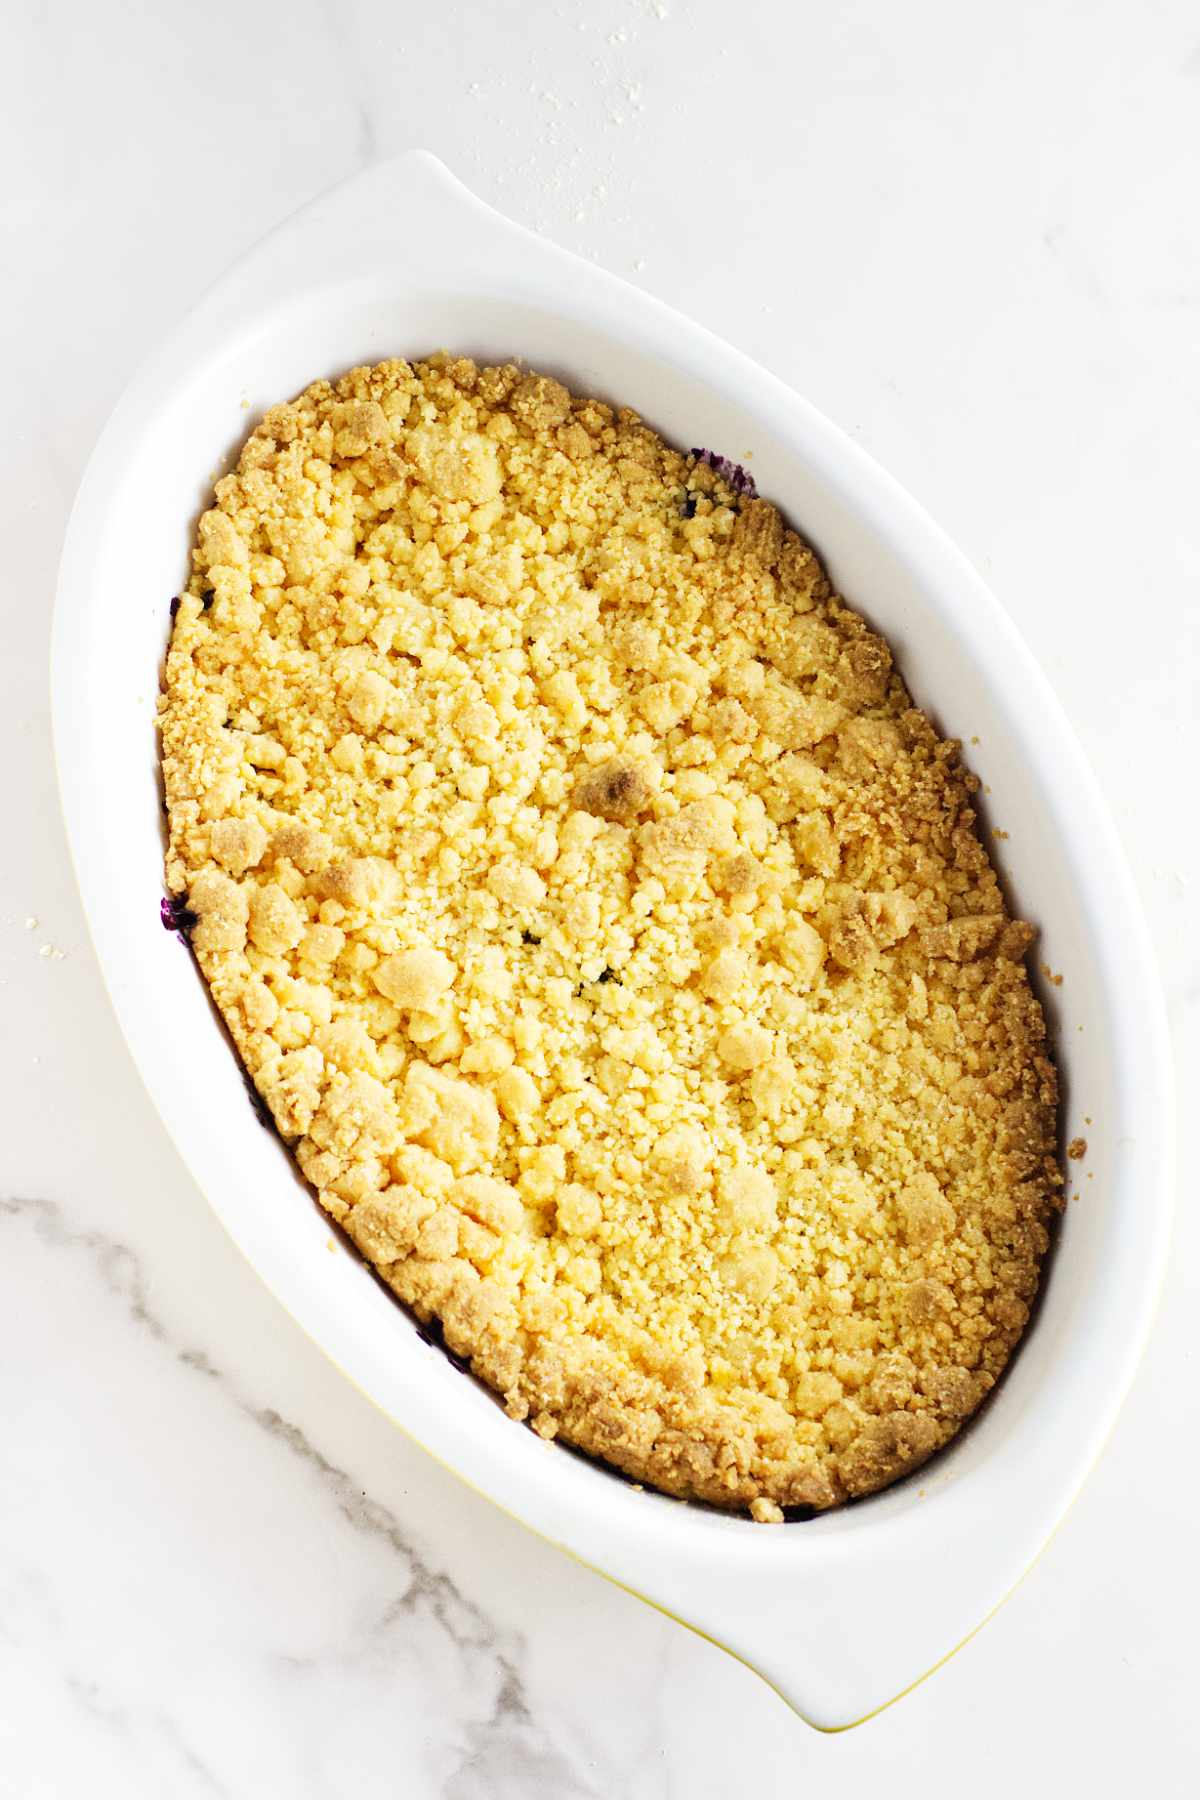 baked cake mix crumble topped blueberry cobbler.